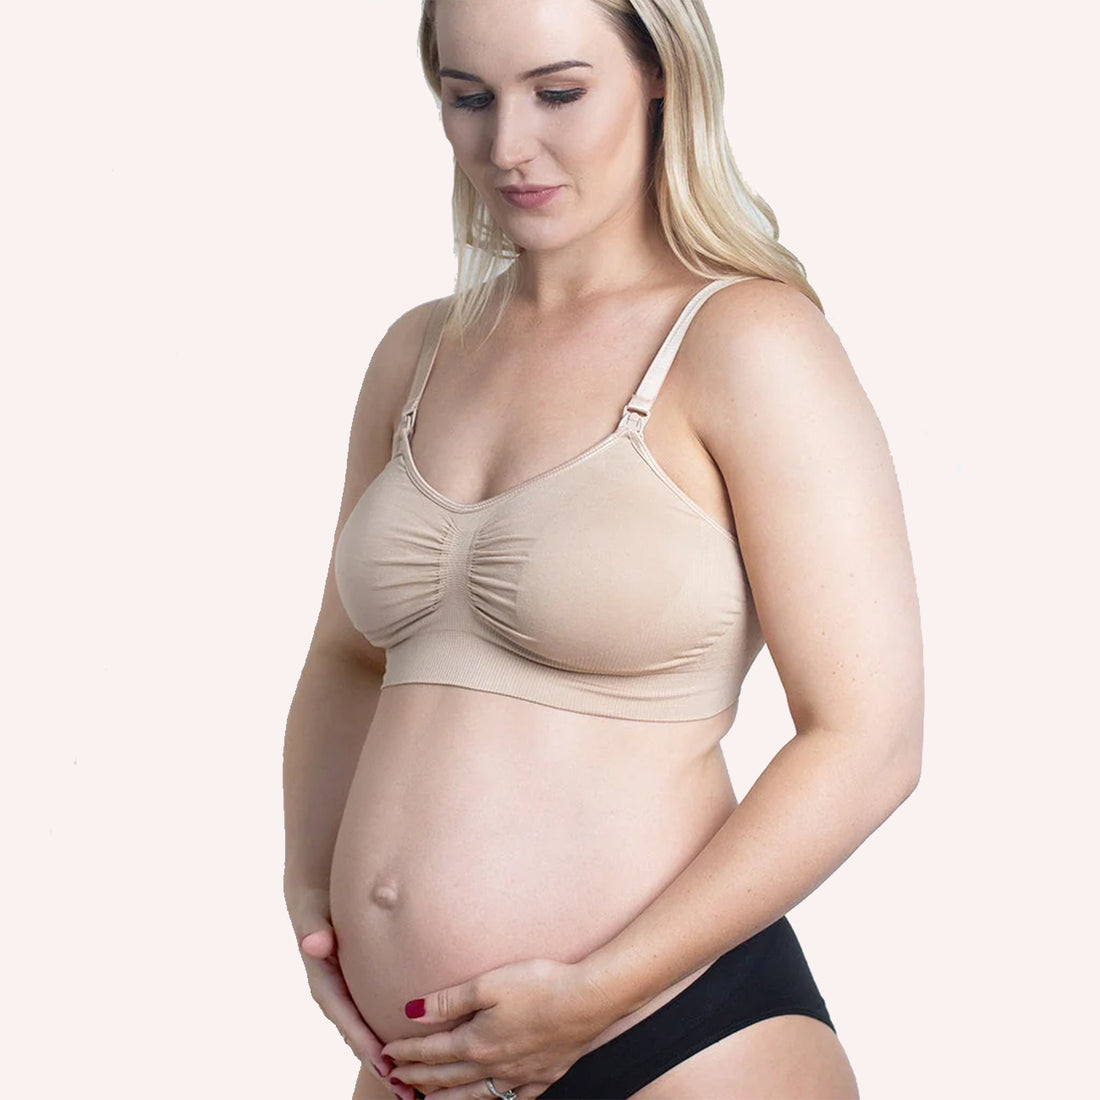 How to choose a maternity bra – The Memo